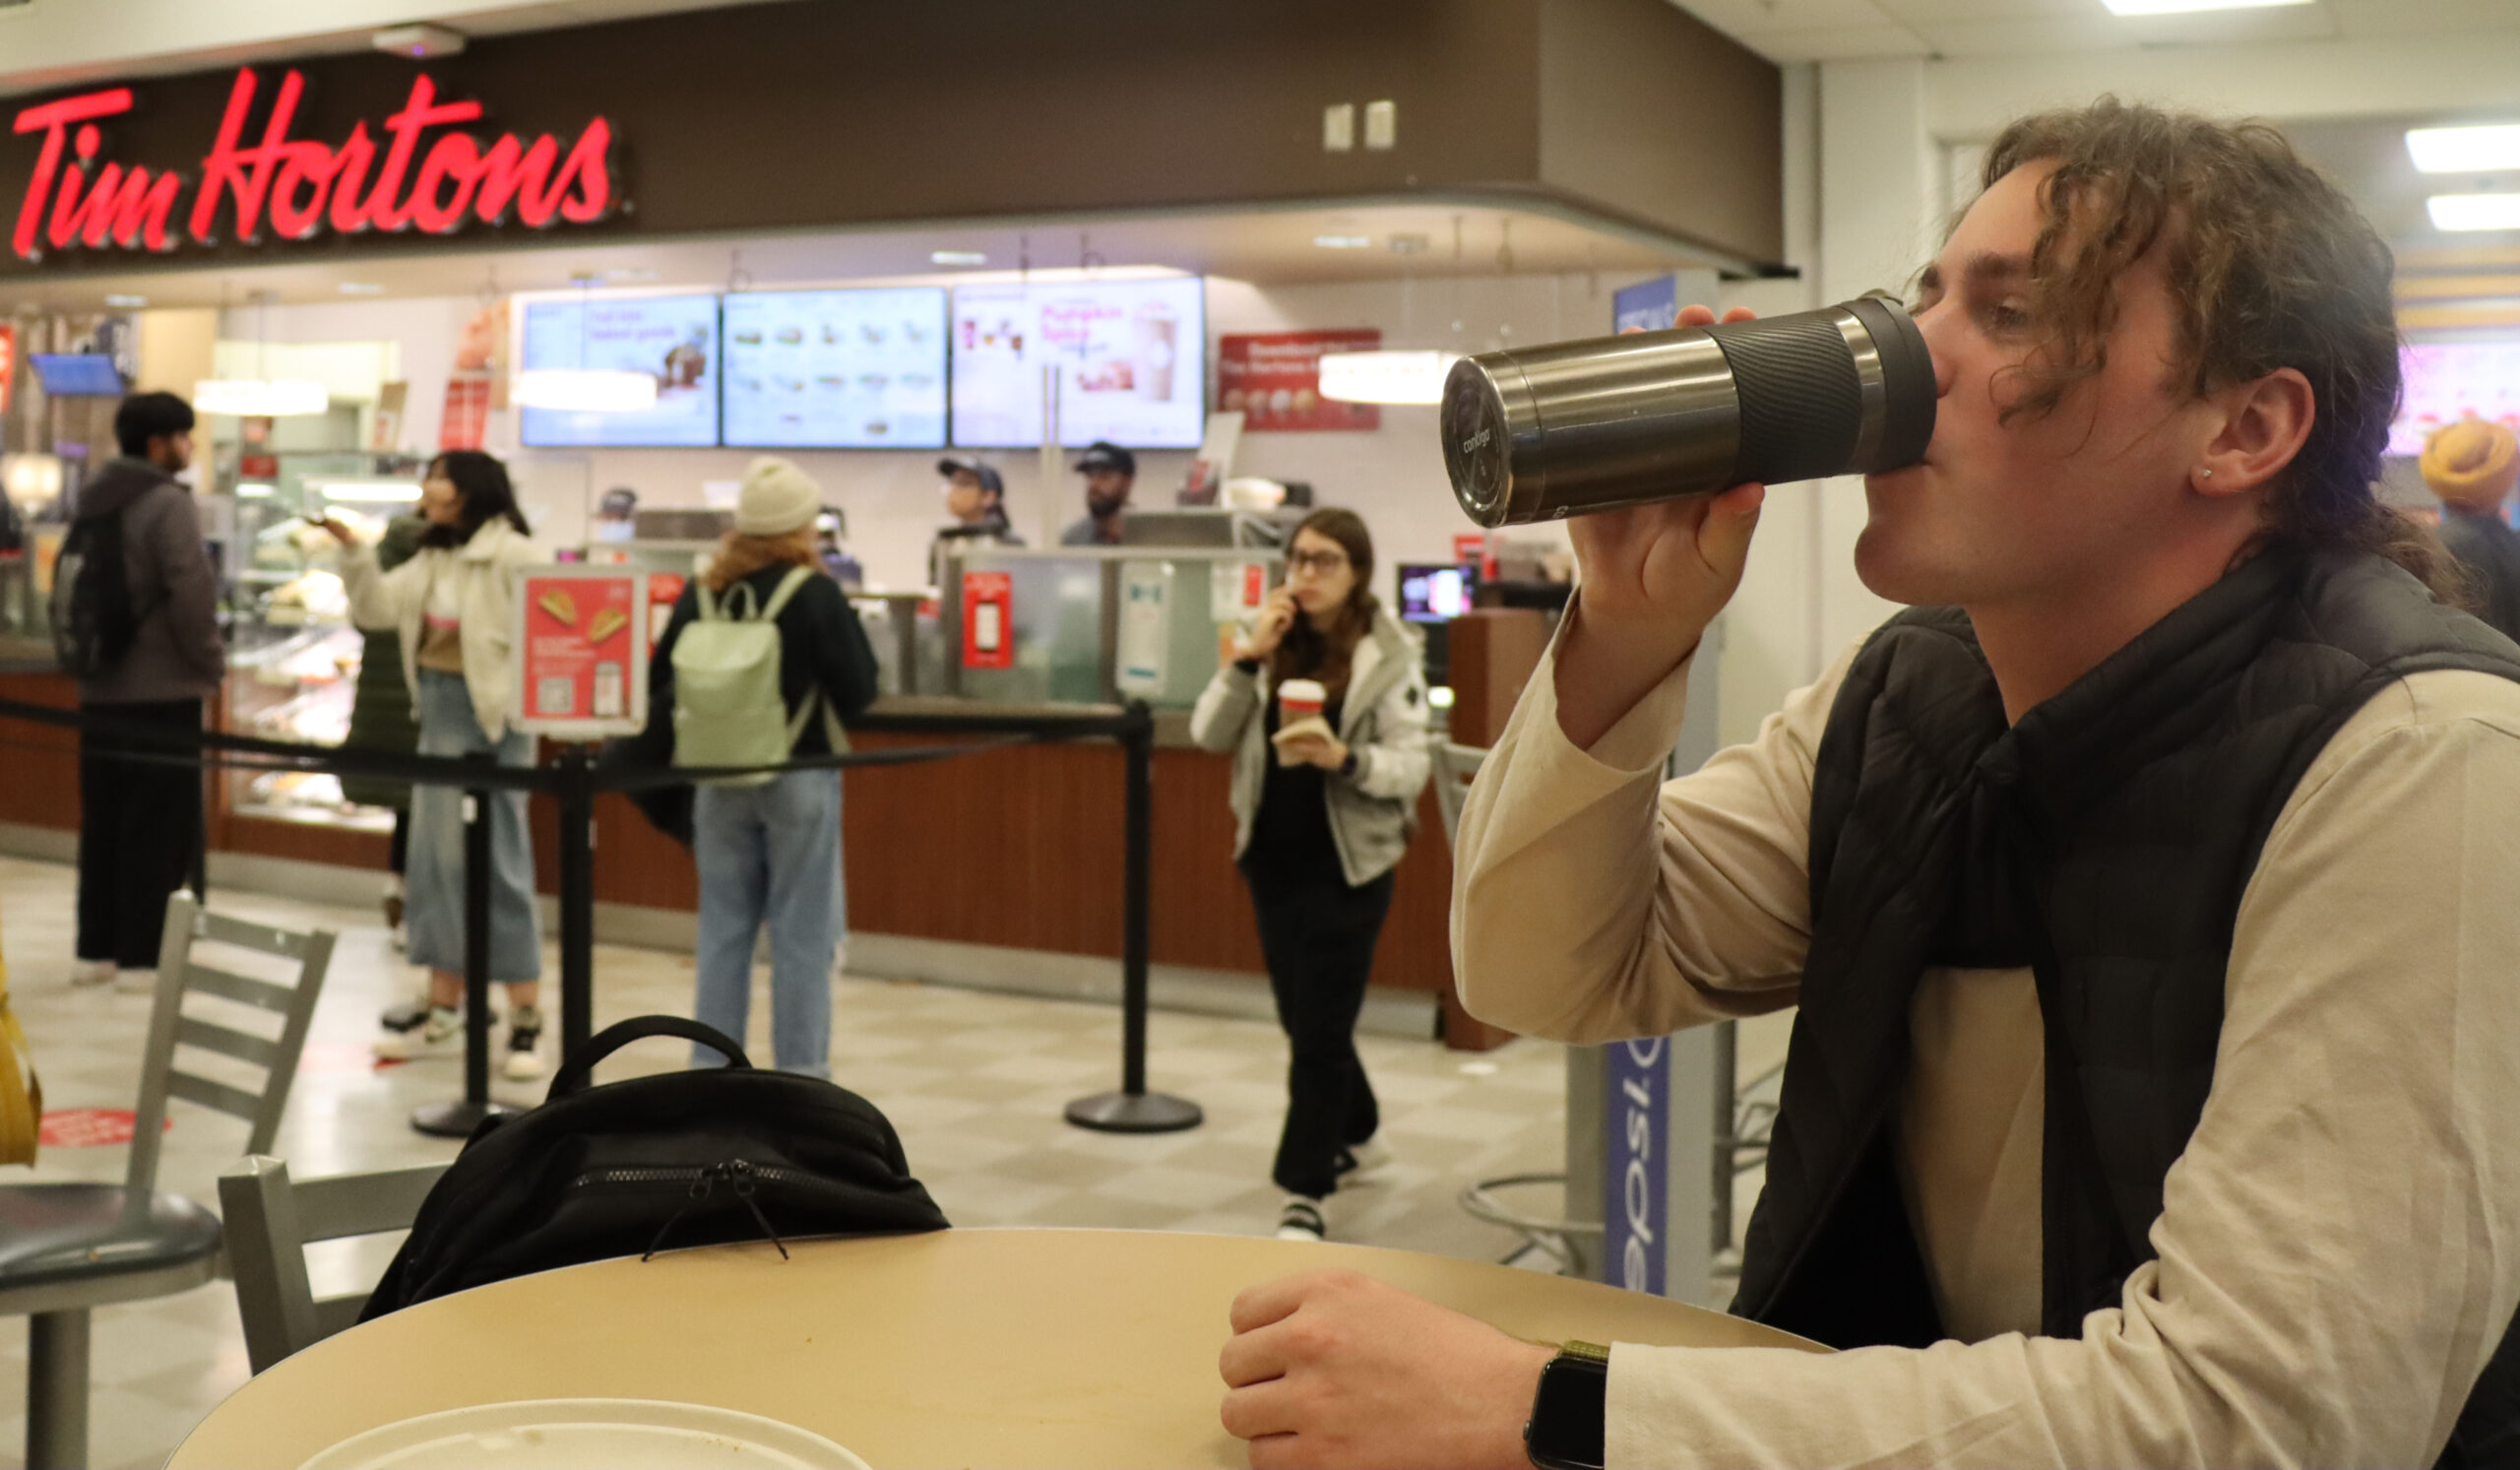 A student sitting at a table drinking from a reusable mug. A Tim Hortons sign is seen in the background.